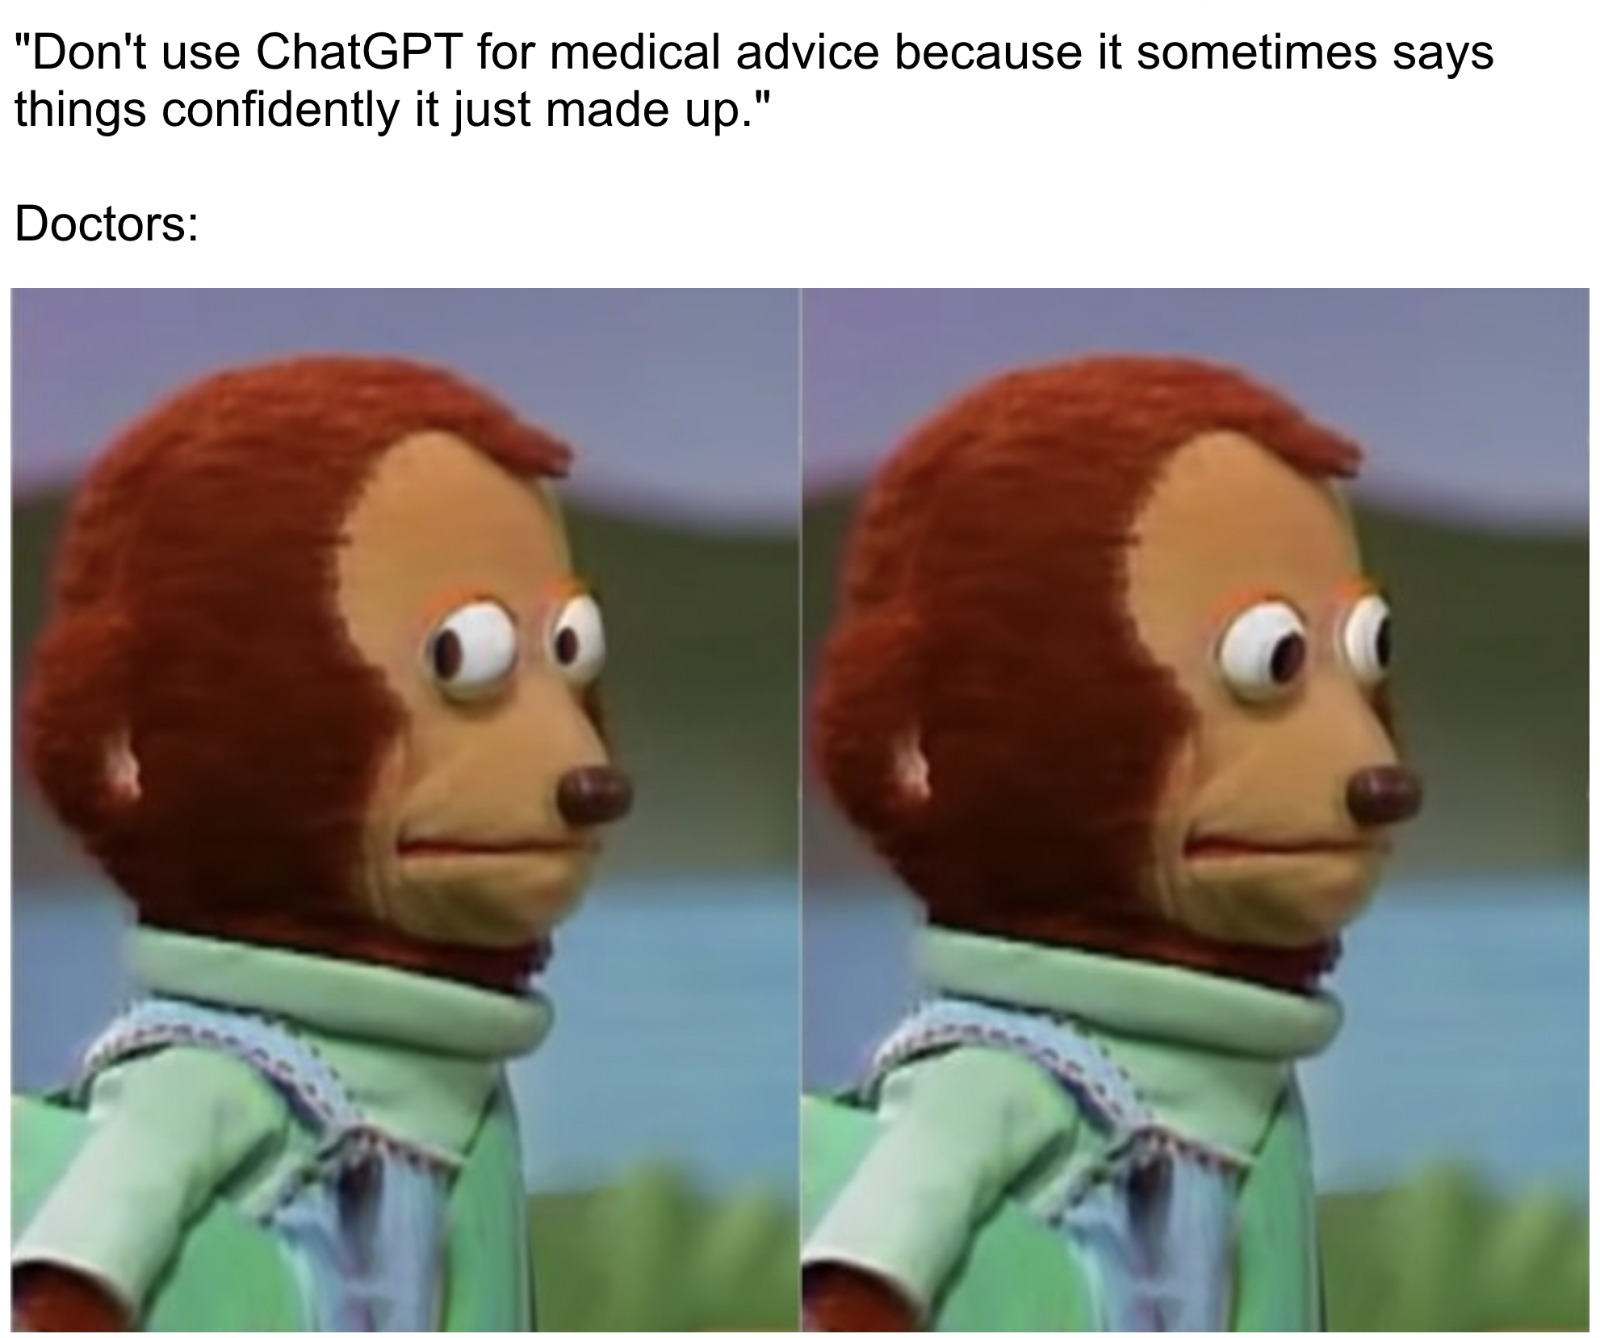 fresh memes - meme embarrassed - "Don't use ChatGPT for medical advice because it sometimes says things confidently it just made up." Doctors